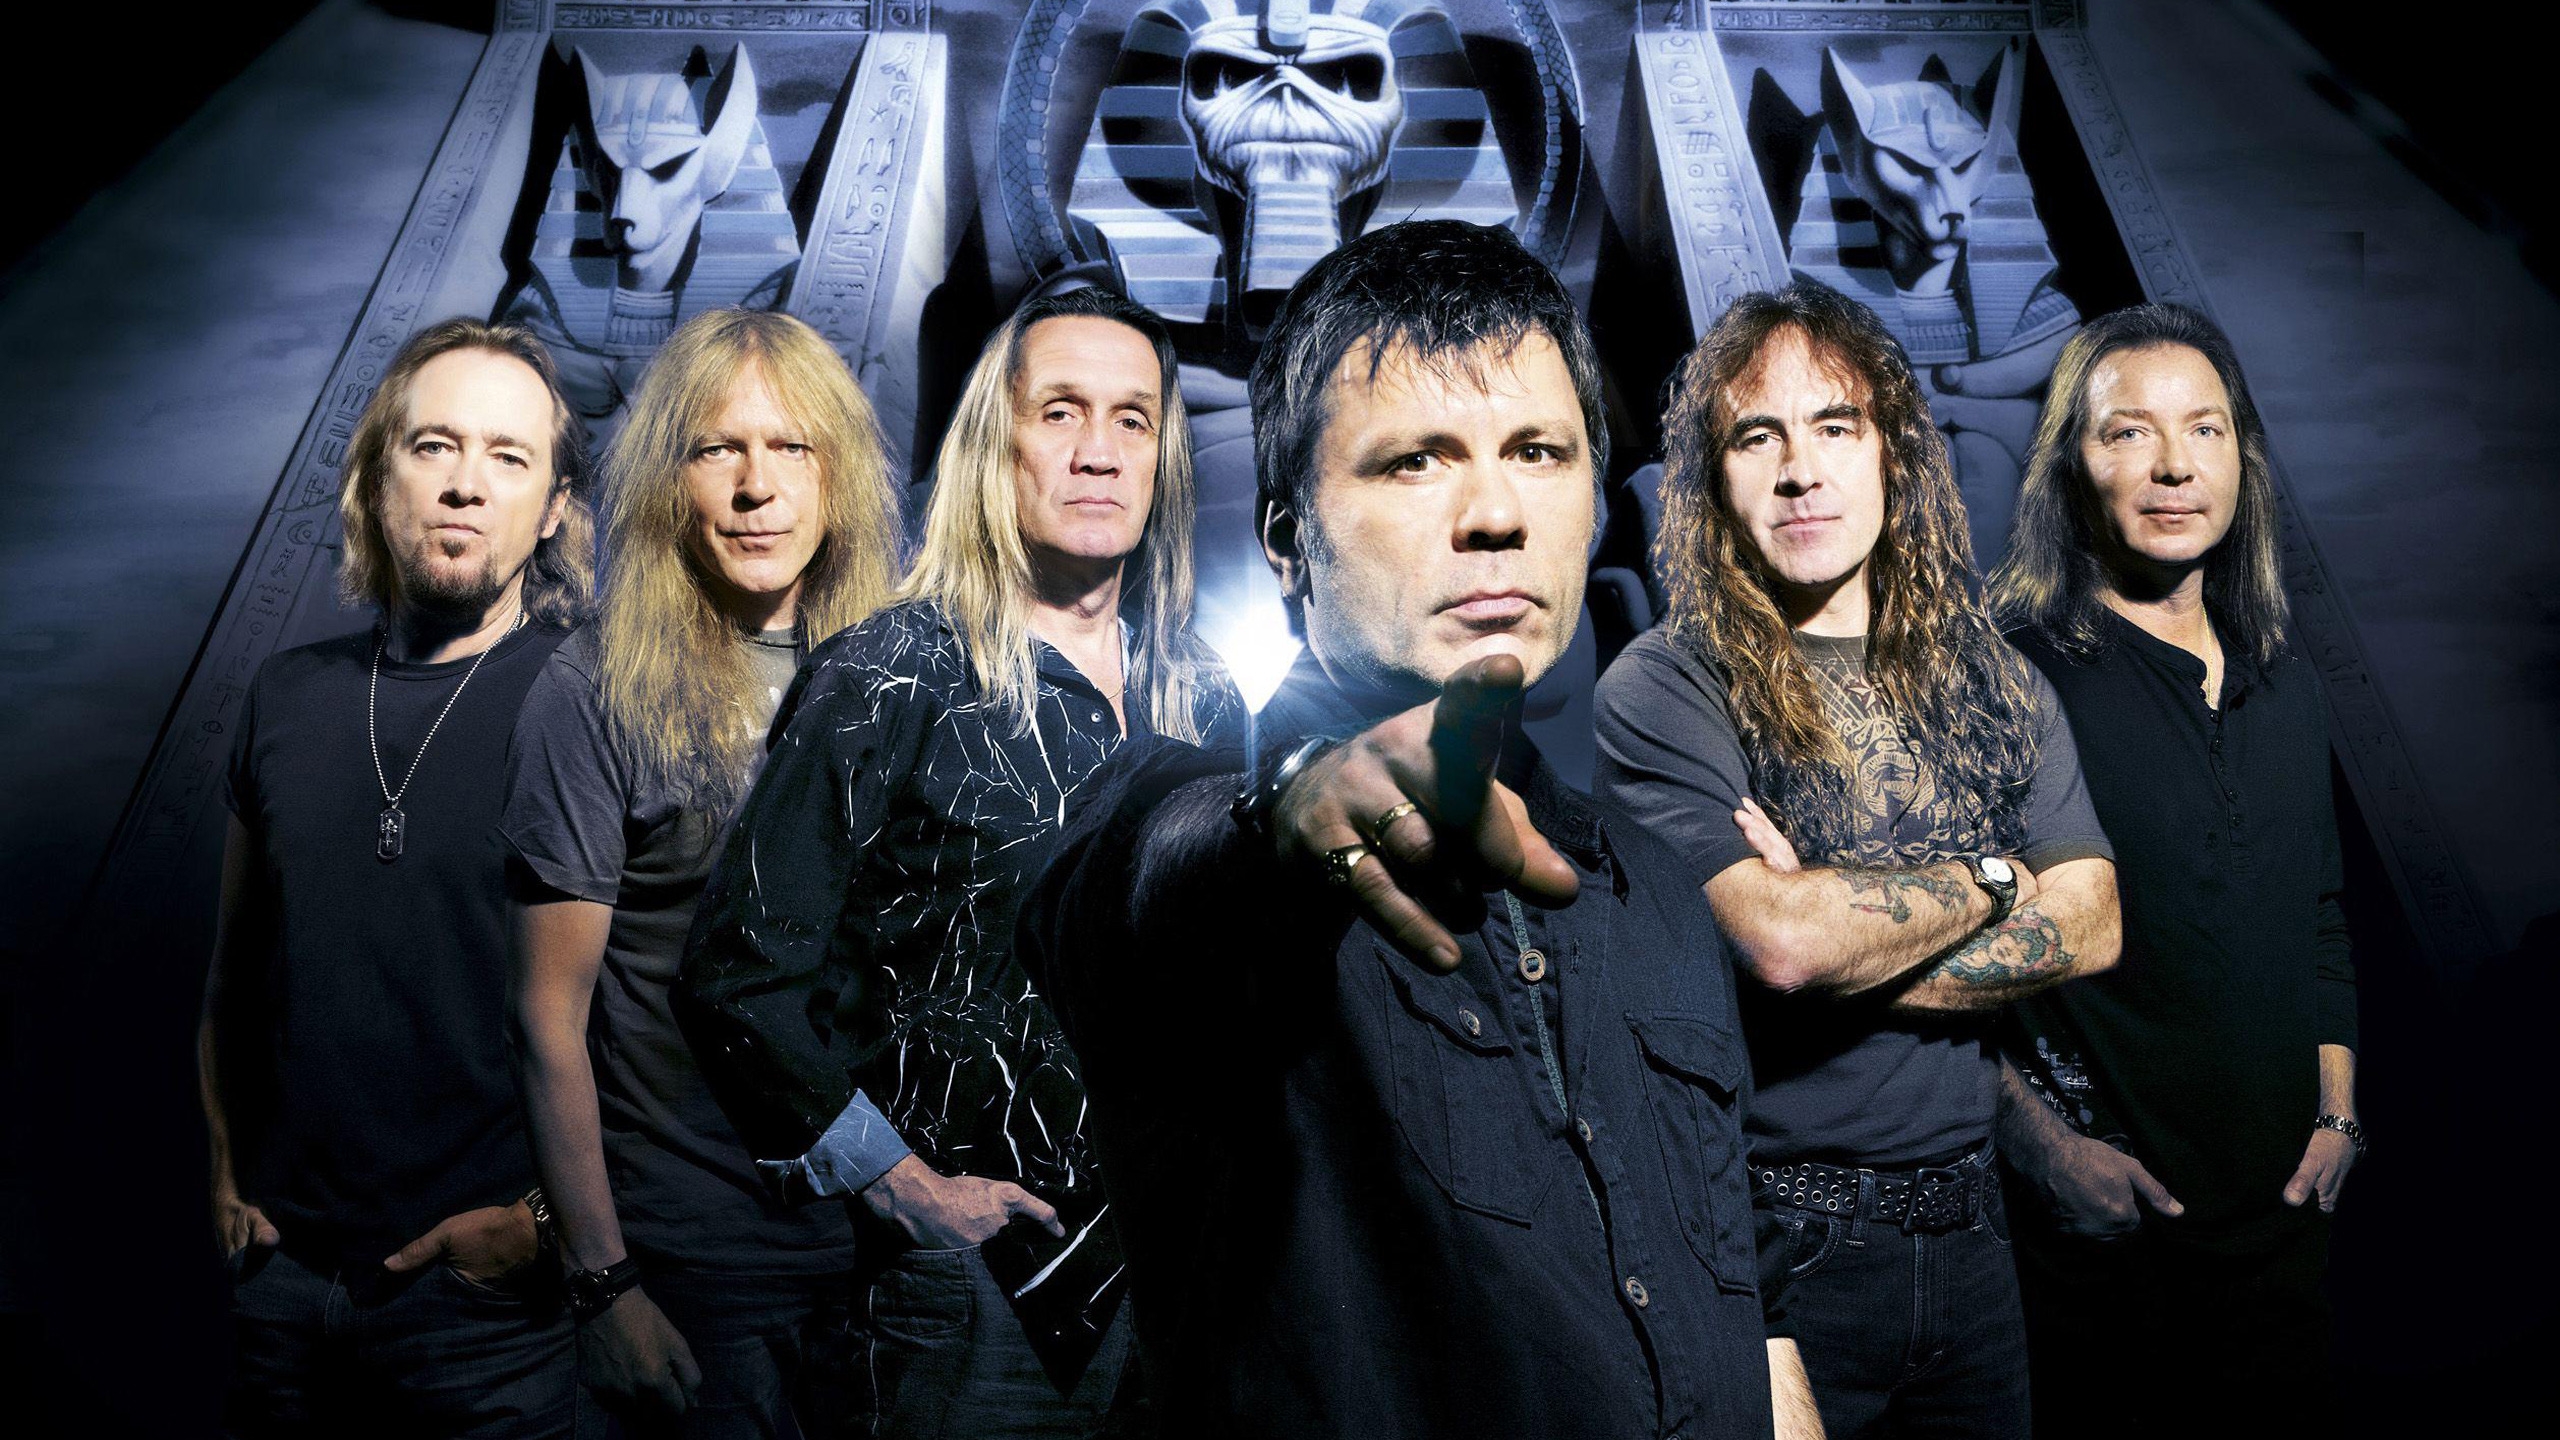 Iron Maiden Band for 2560x1440 HDTV resolution